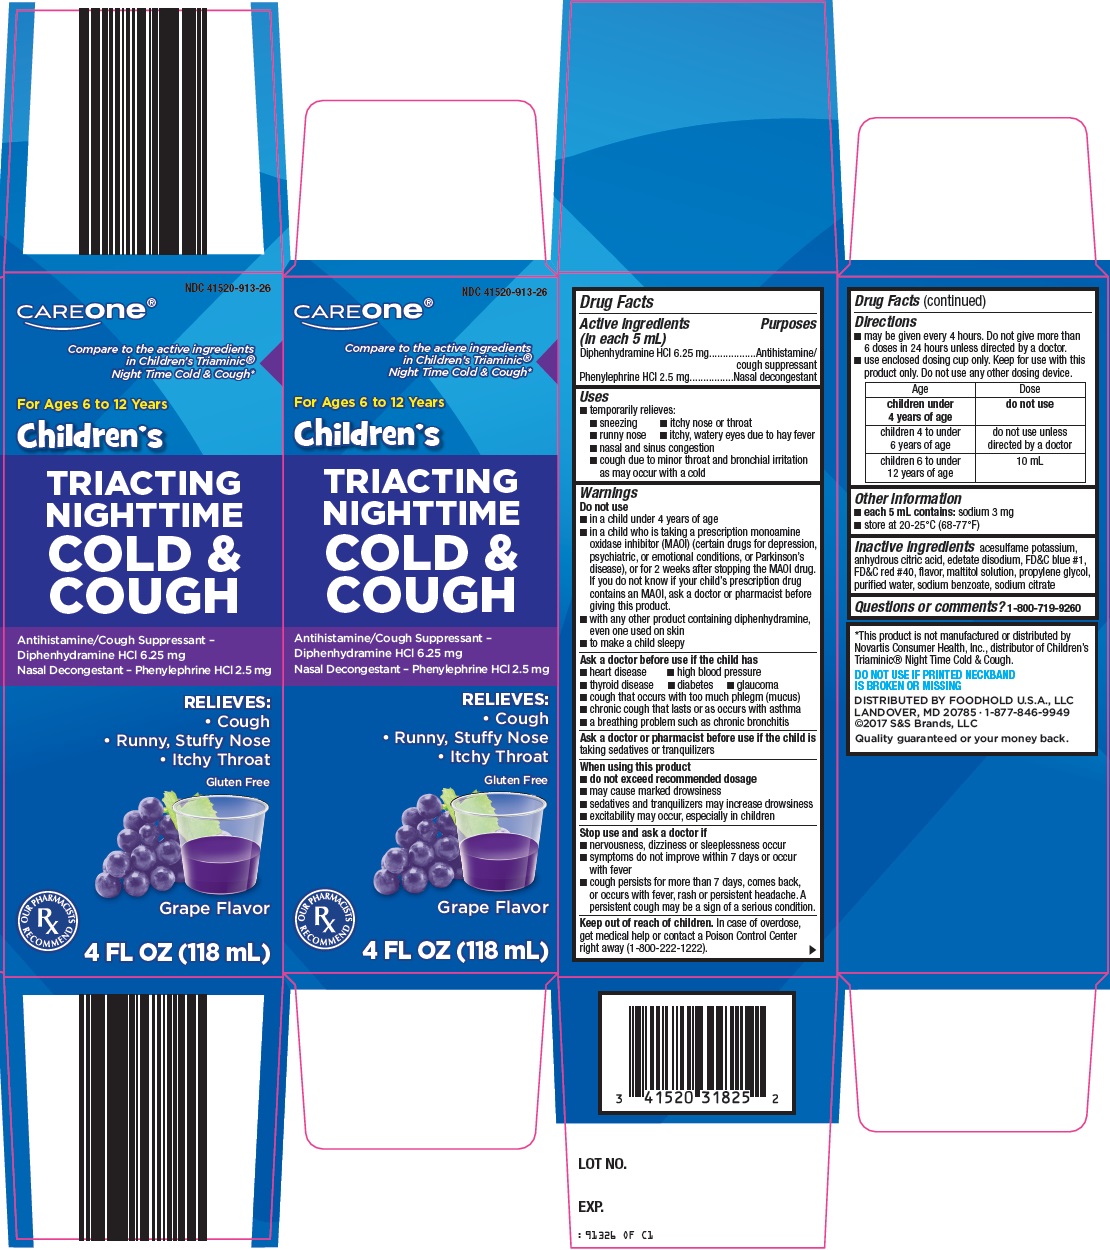 913-26-cold & cough.jpg